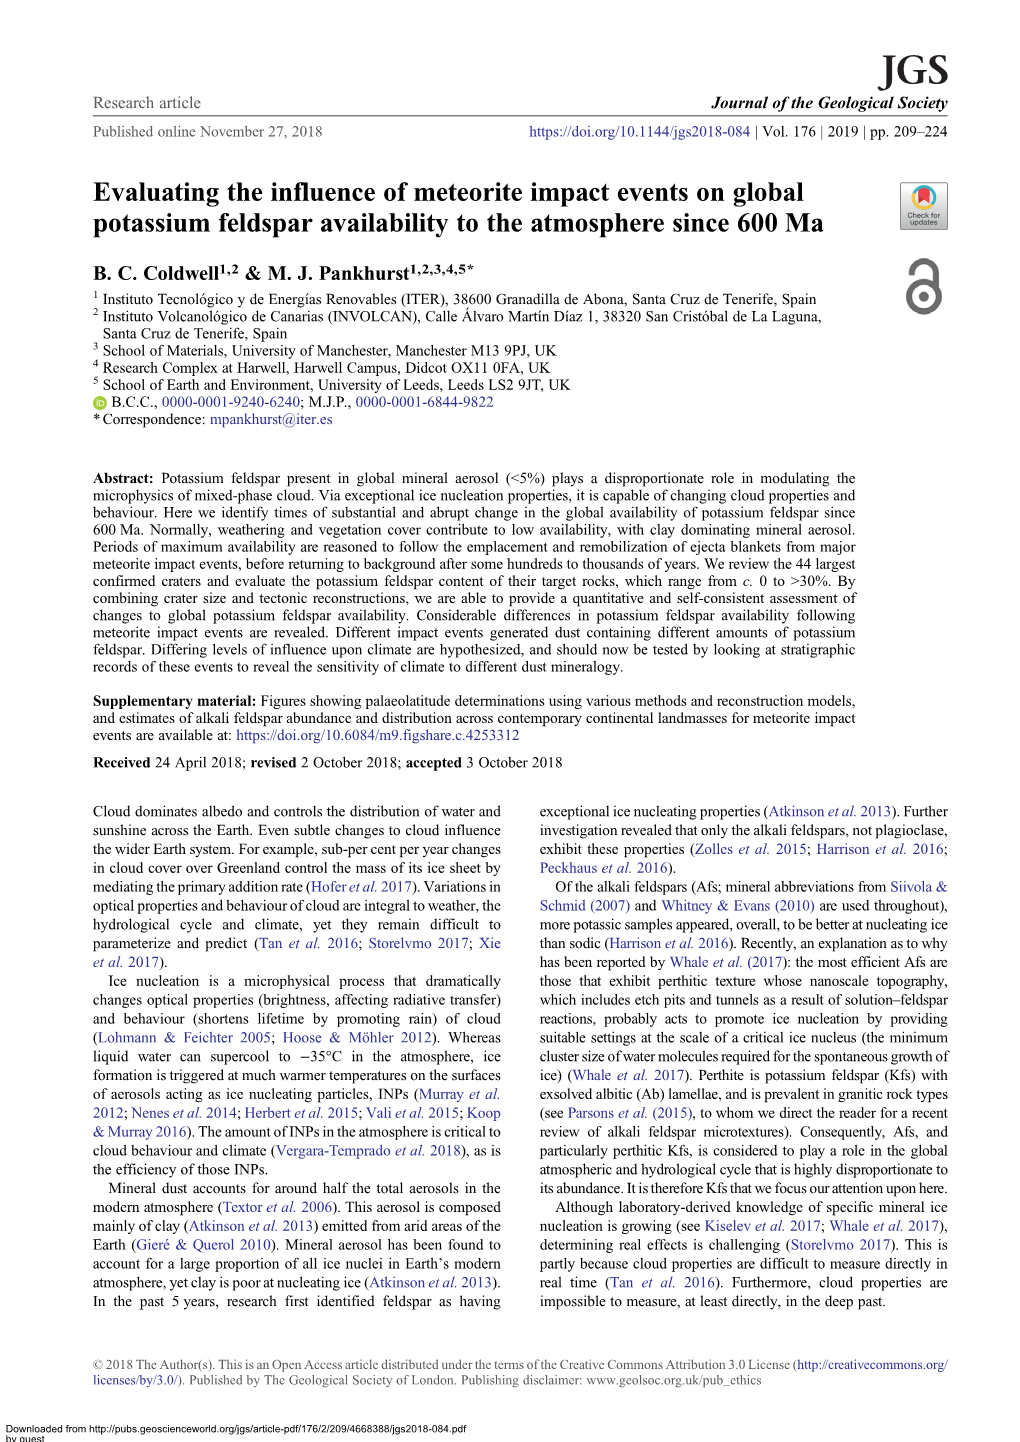 Evaluating the Influence of Meteorite Impact Events on Global Potassium Feldspar Availability to the Atmosphere Since 600 Ma